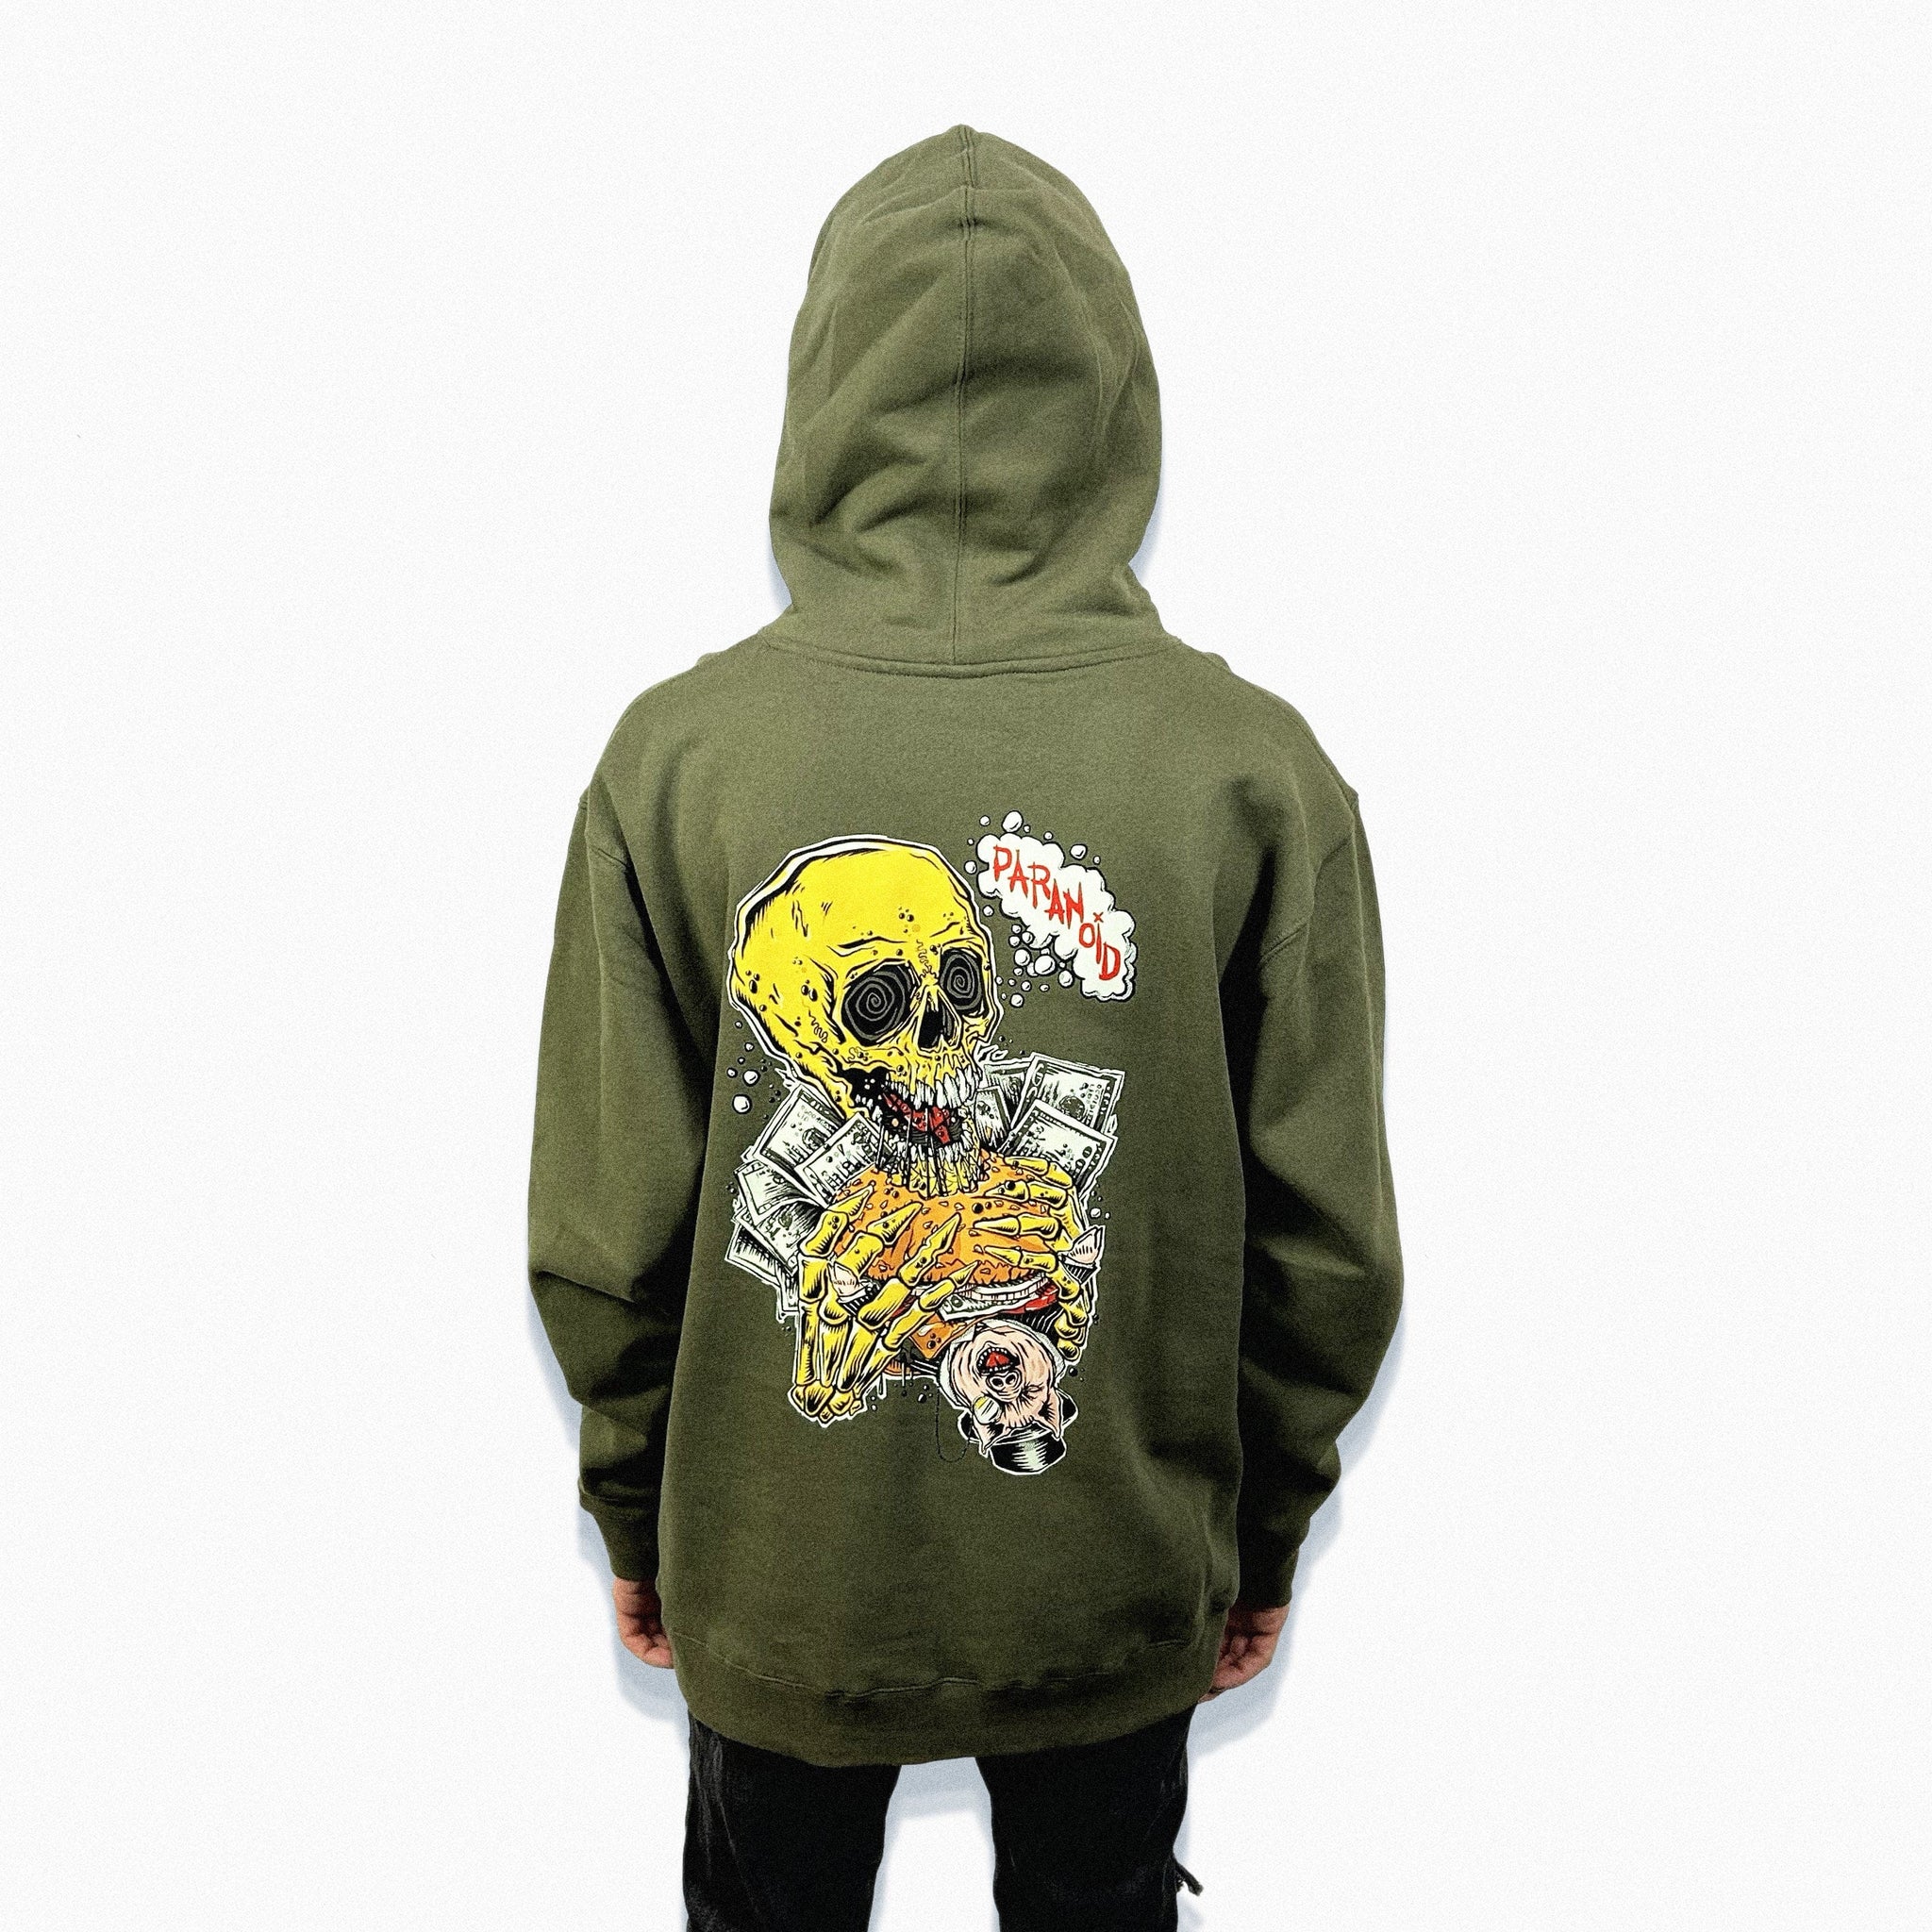 EAT THE RICH PREMIUM PULLOVER HEAVYWEIGHT HOODIE